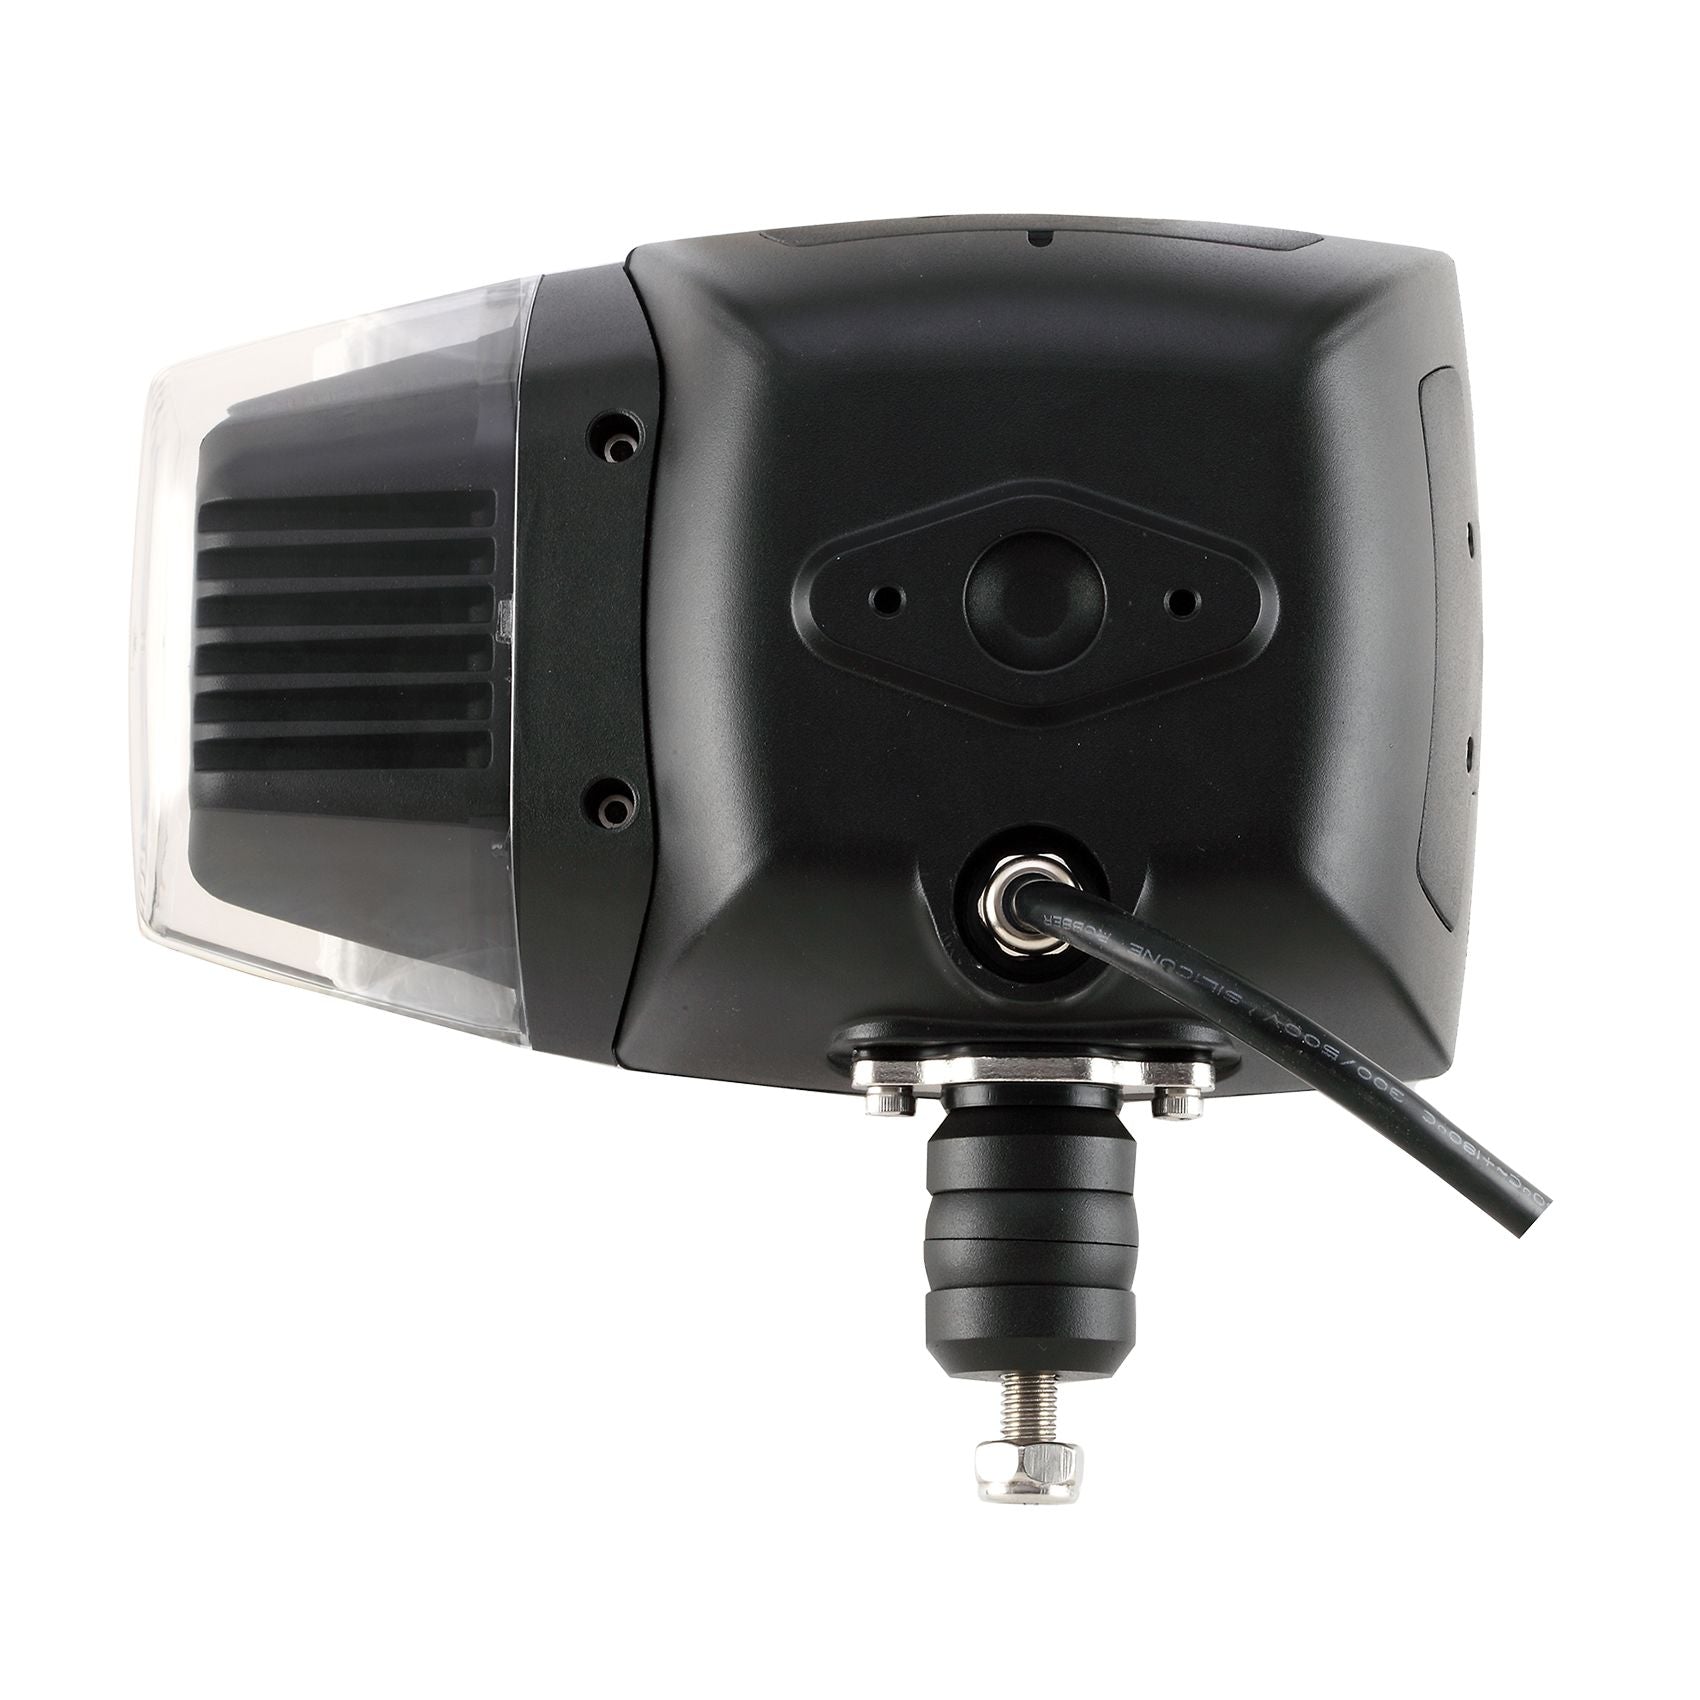 Uni-Bond LWP6600S - Heated Lens LED Snow Plow Light with Automatic On/Off Temperature Sensor